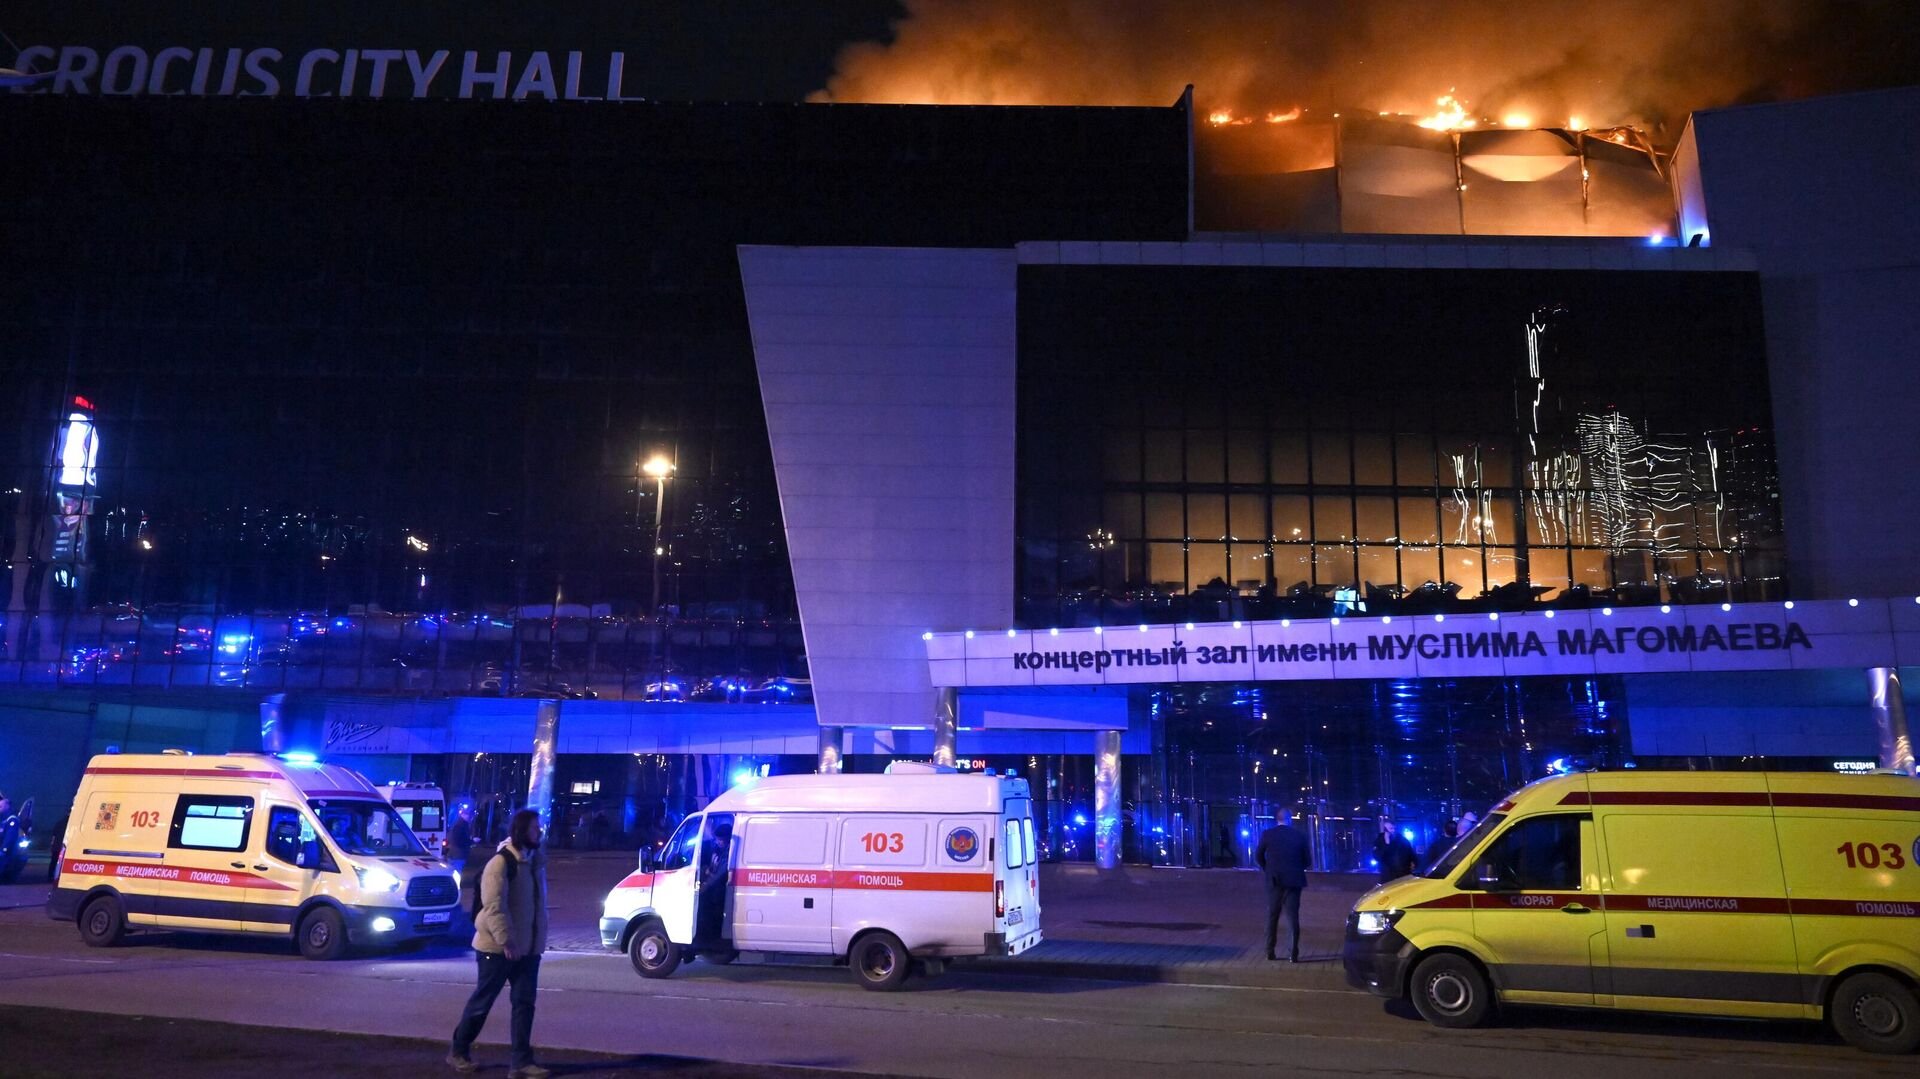 More than 60 people killed in terror attack at Crocus City Hall